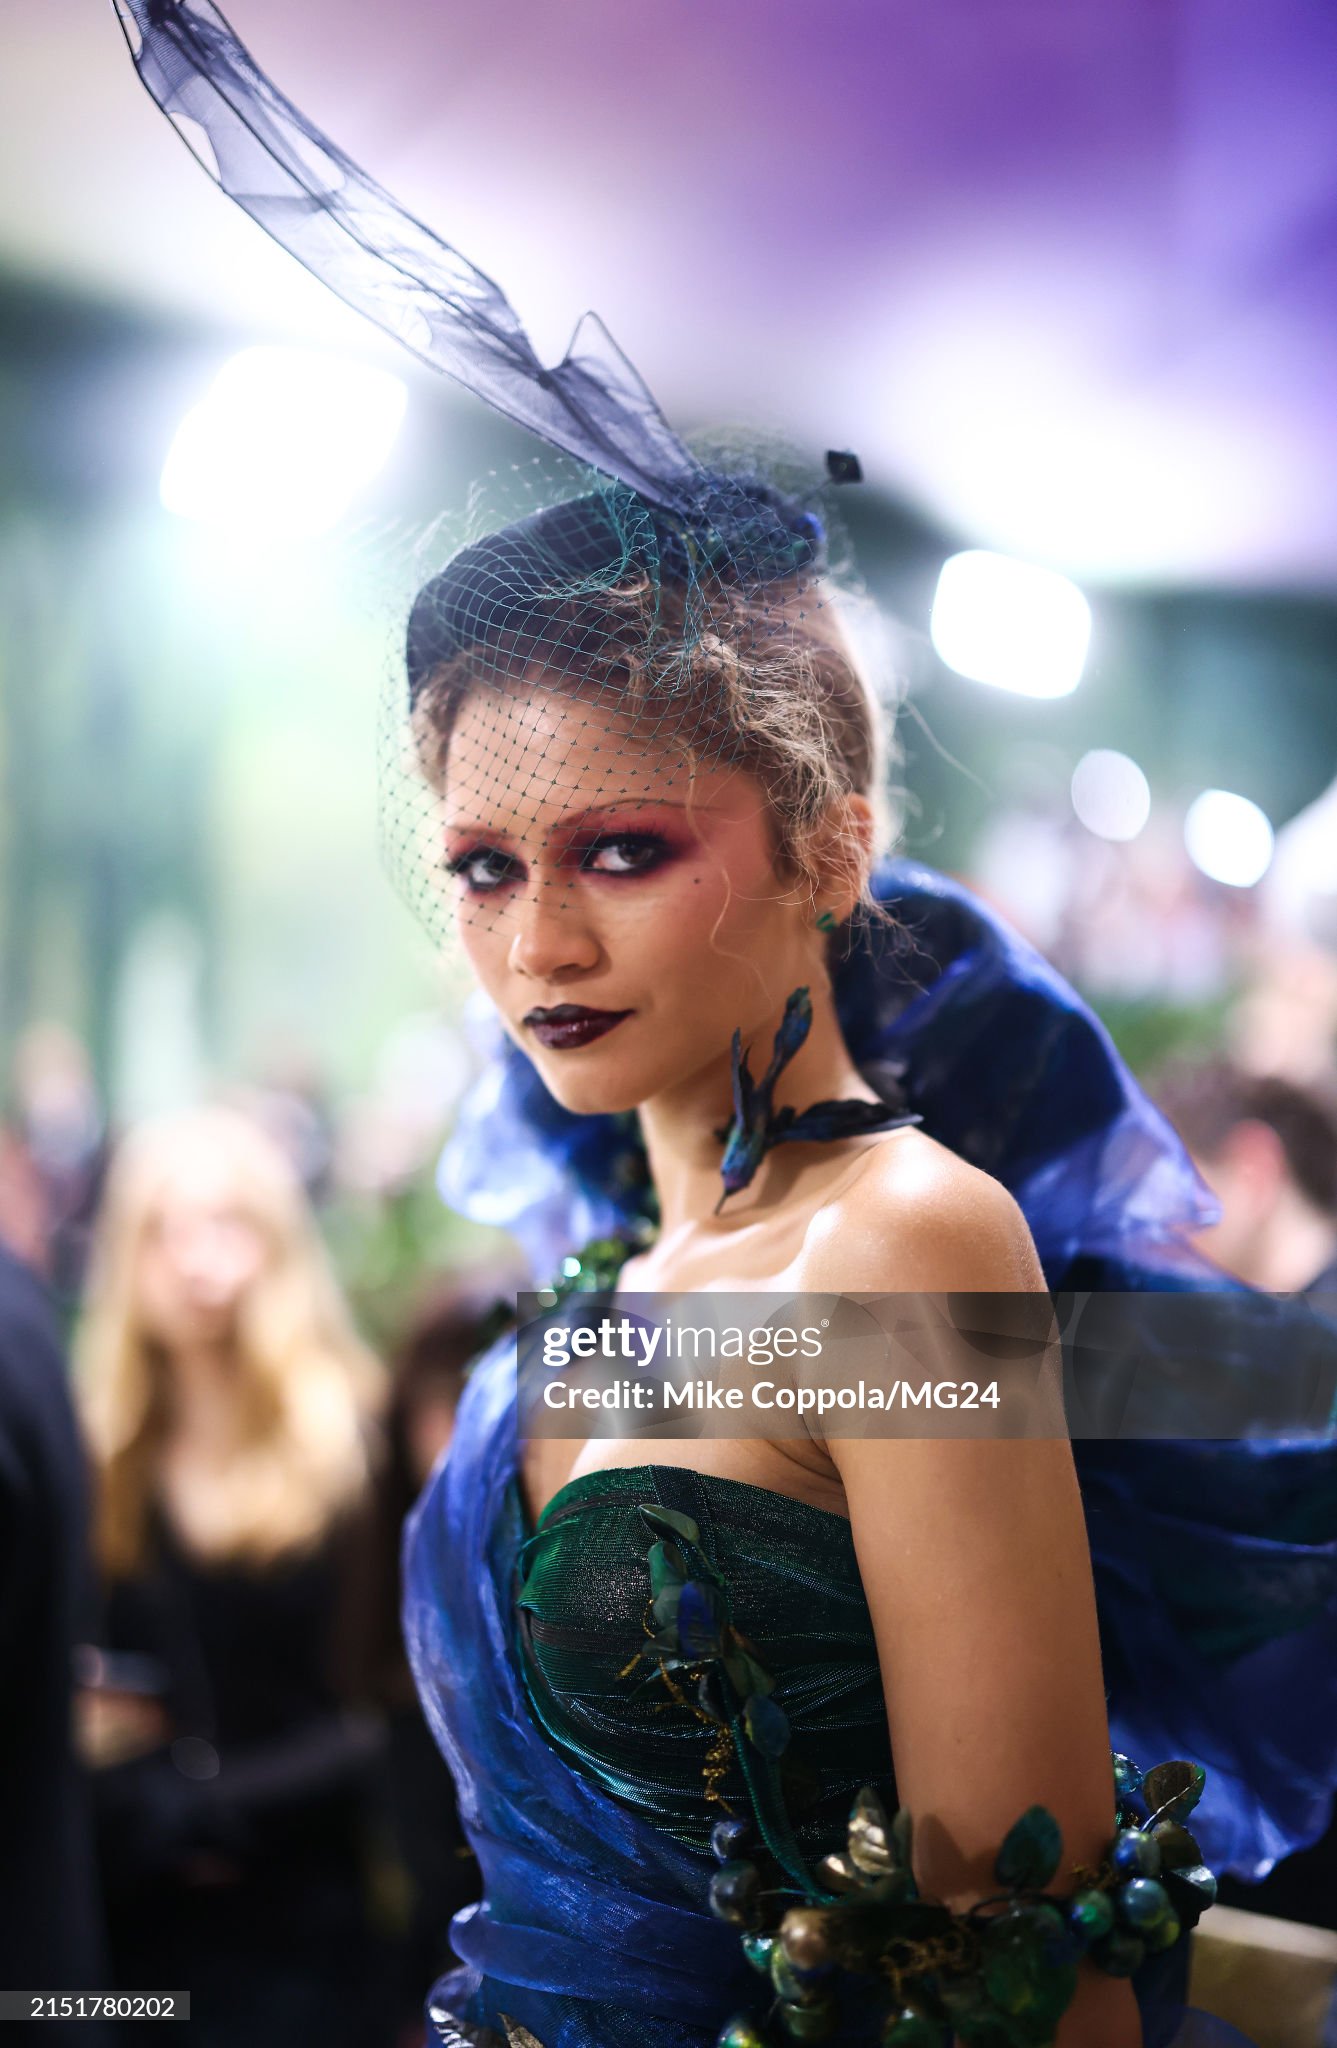 gettyimages-2151780202-2048x2048.jpg